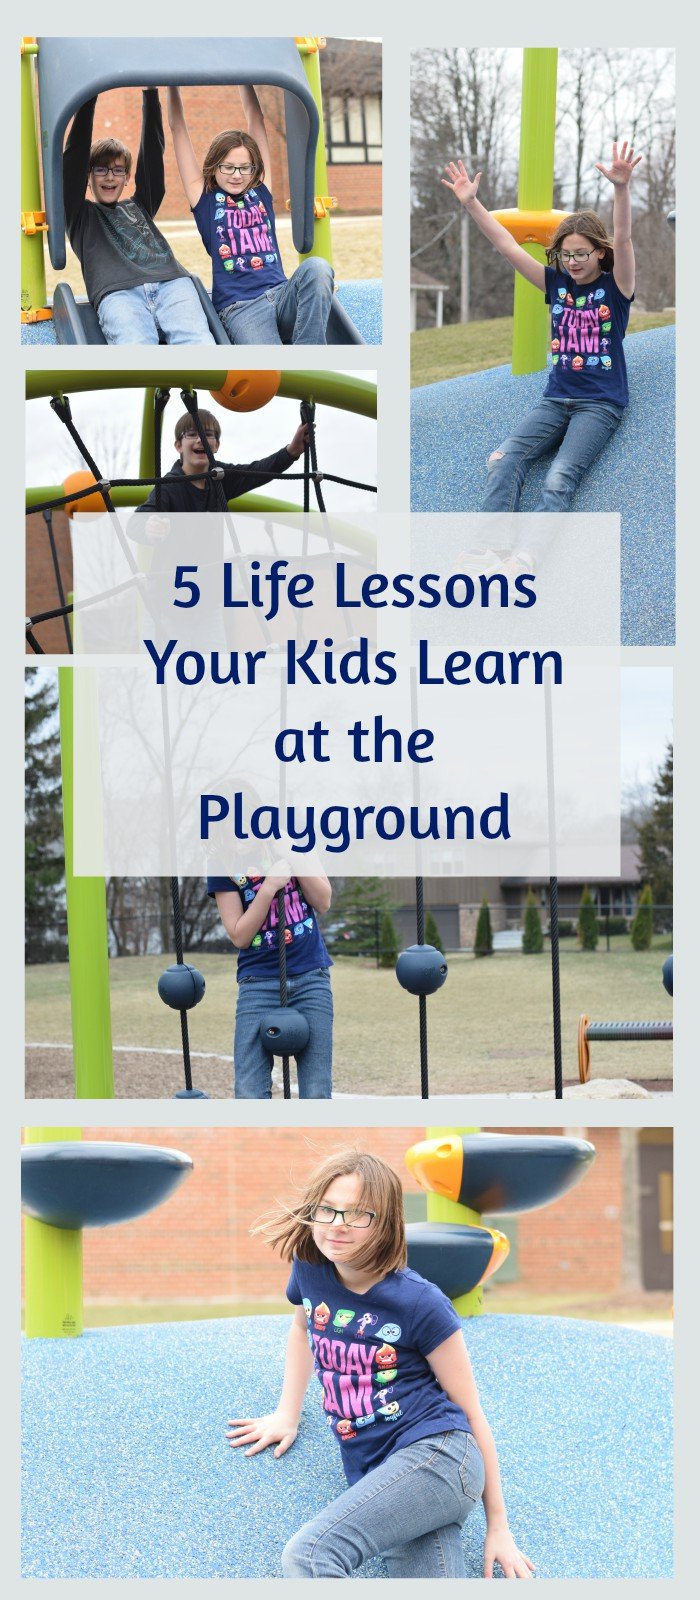 5 Life Lessons kids learn. Playground benefits kids both physically and mentally. This is a great excuse to go visit a park near you today!